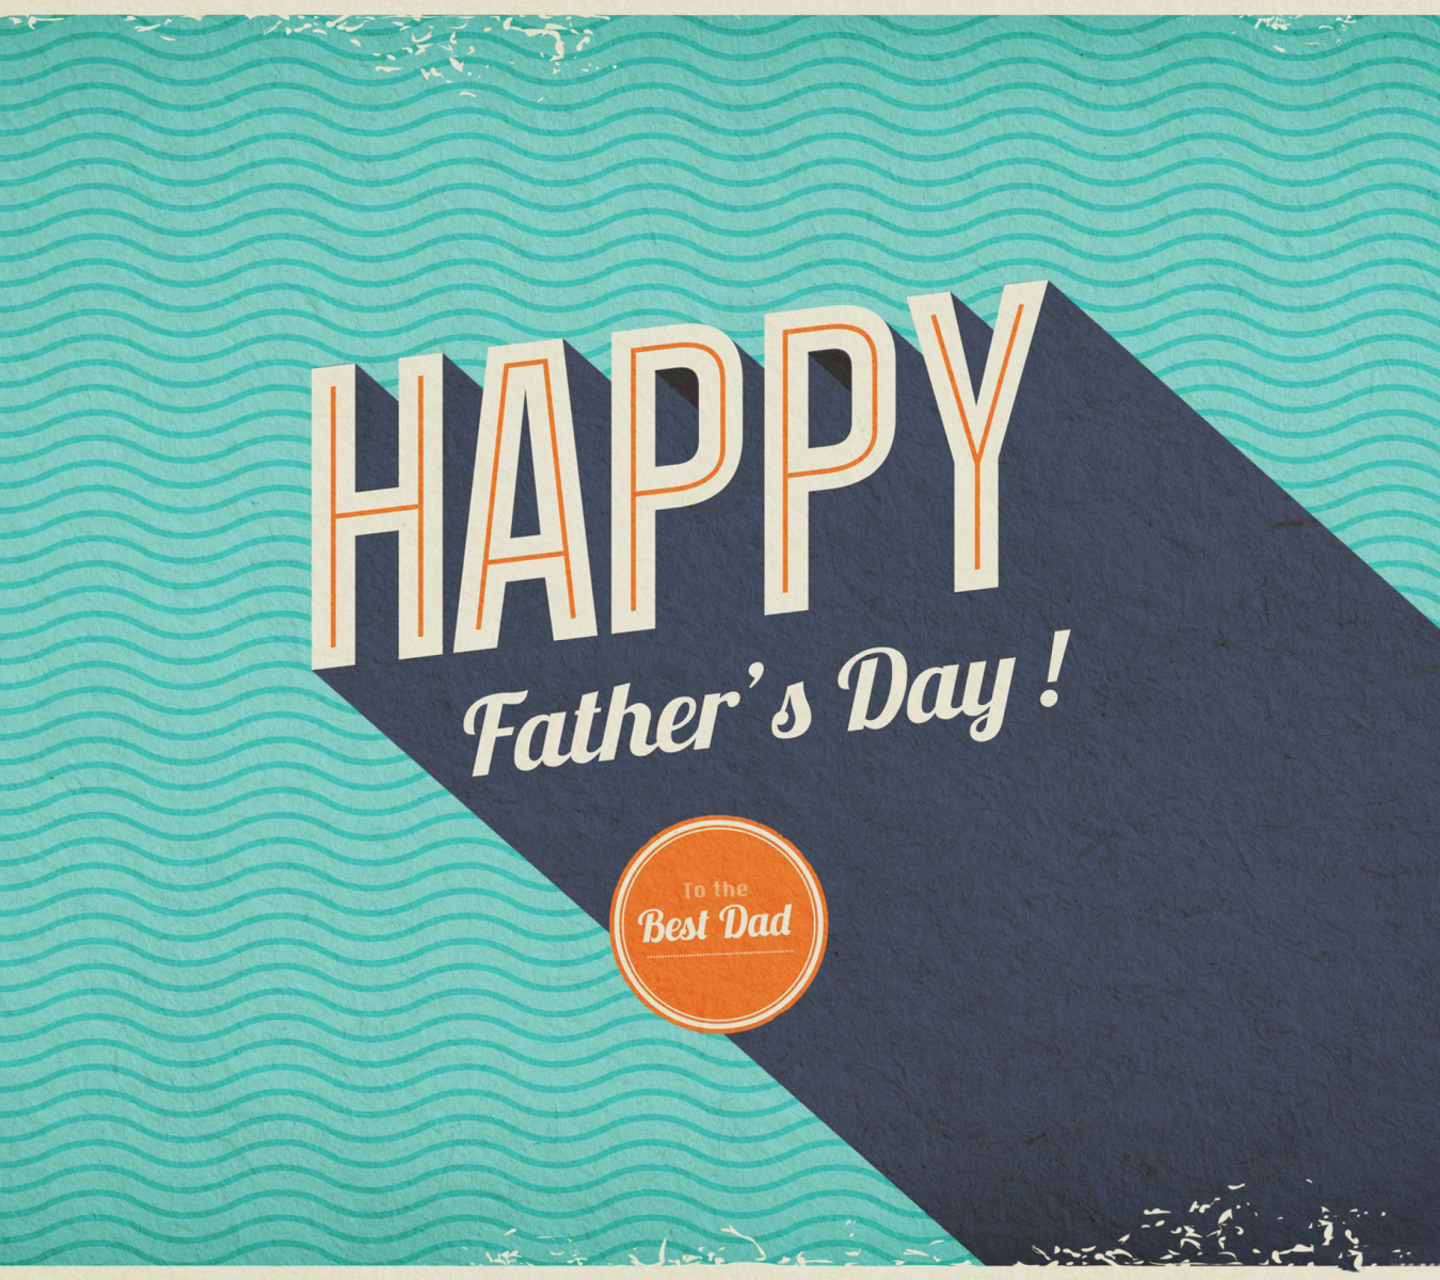 Happy Fathers Day wallpaper 1440x1280